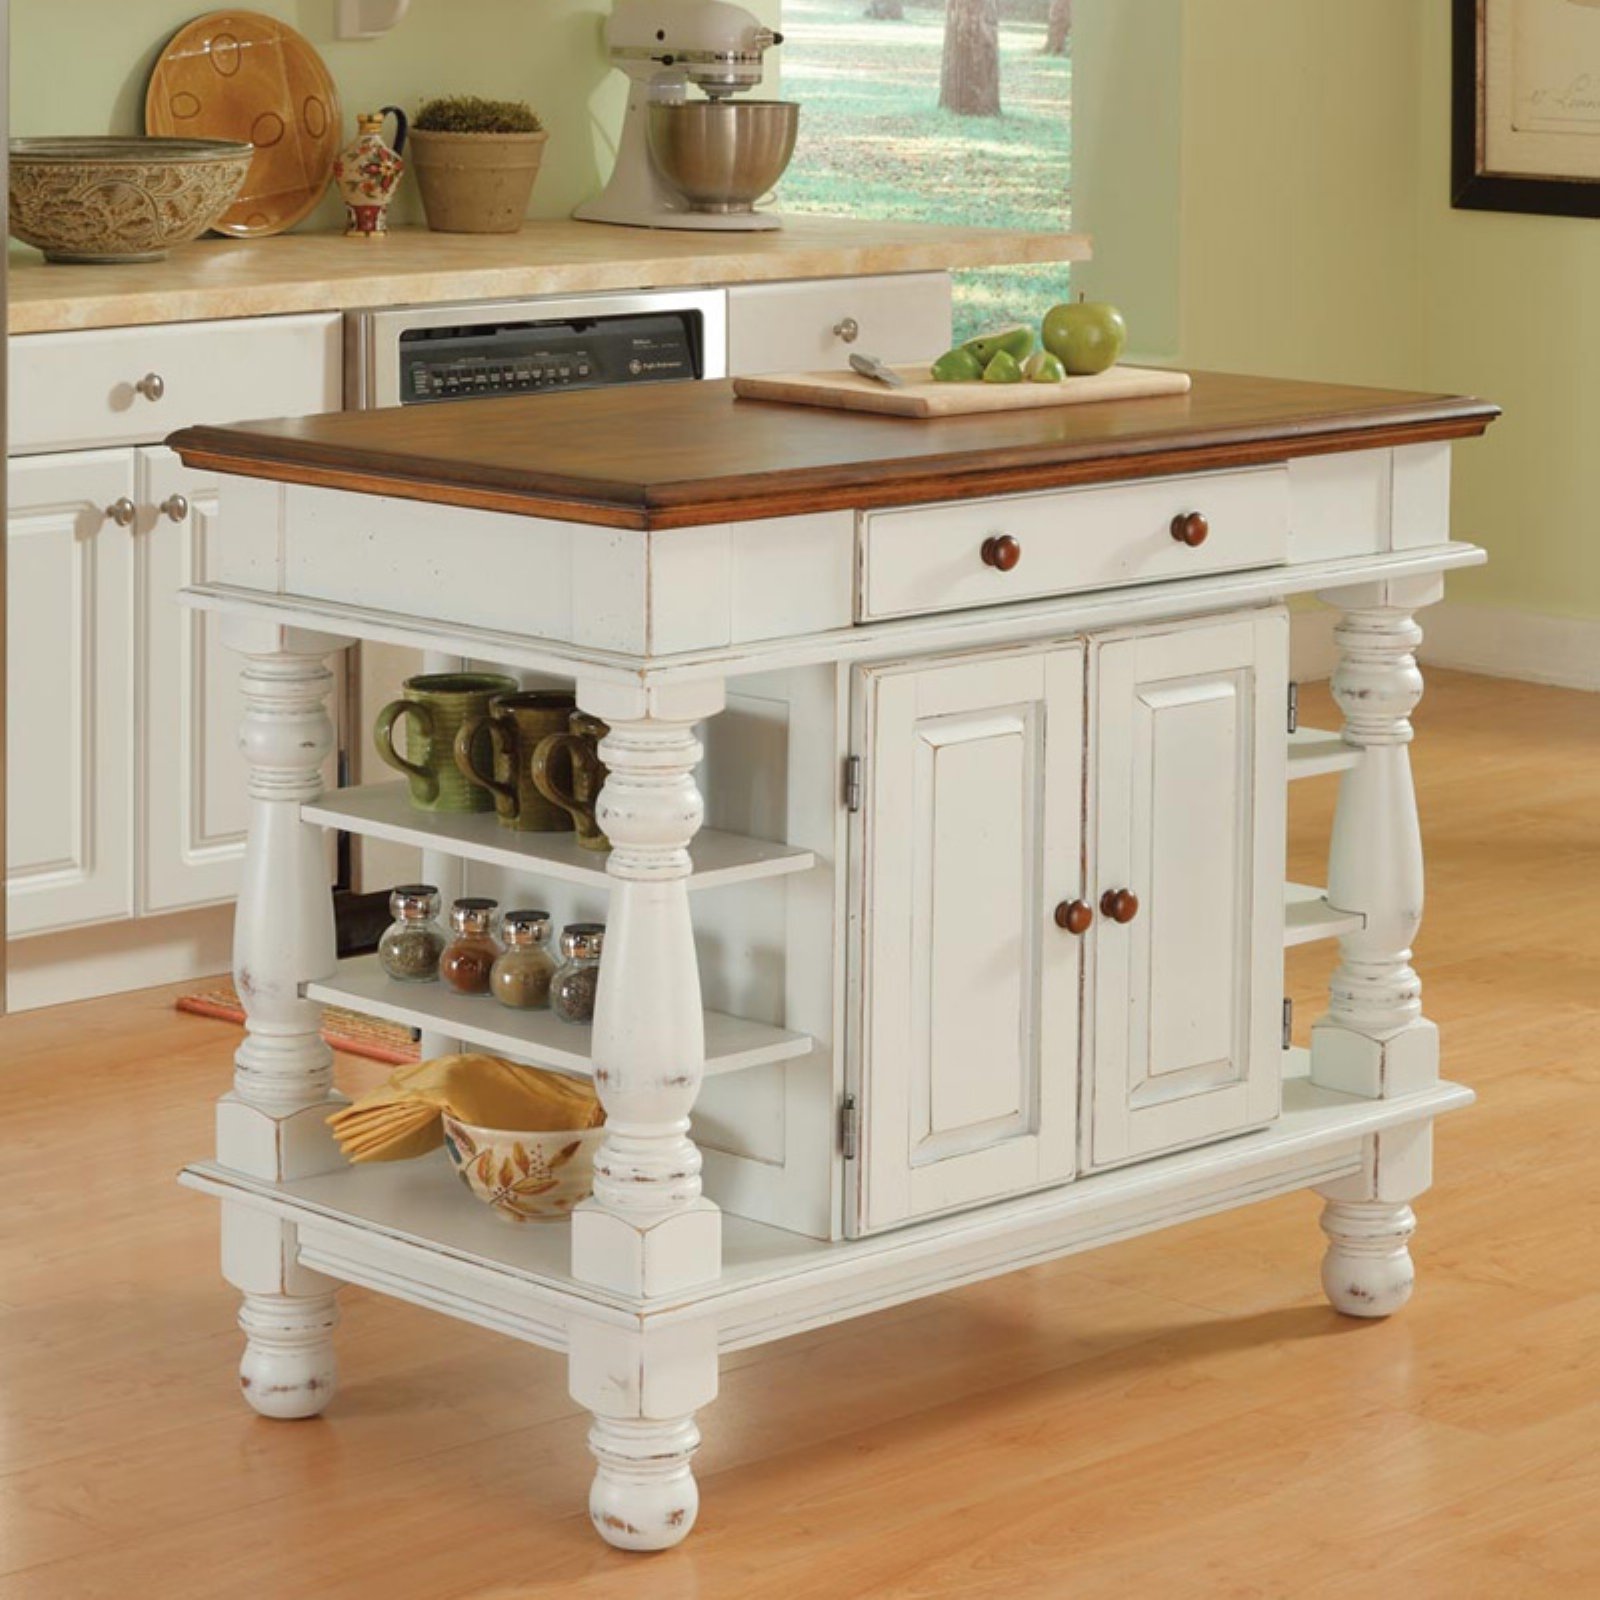 Homestyles Americana Off White Wood Kitchen Island with Storage and Open Shelves - image 1 of 2